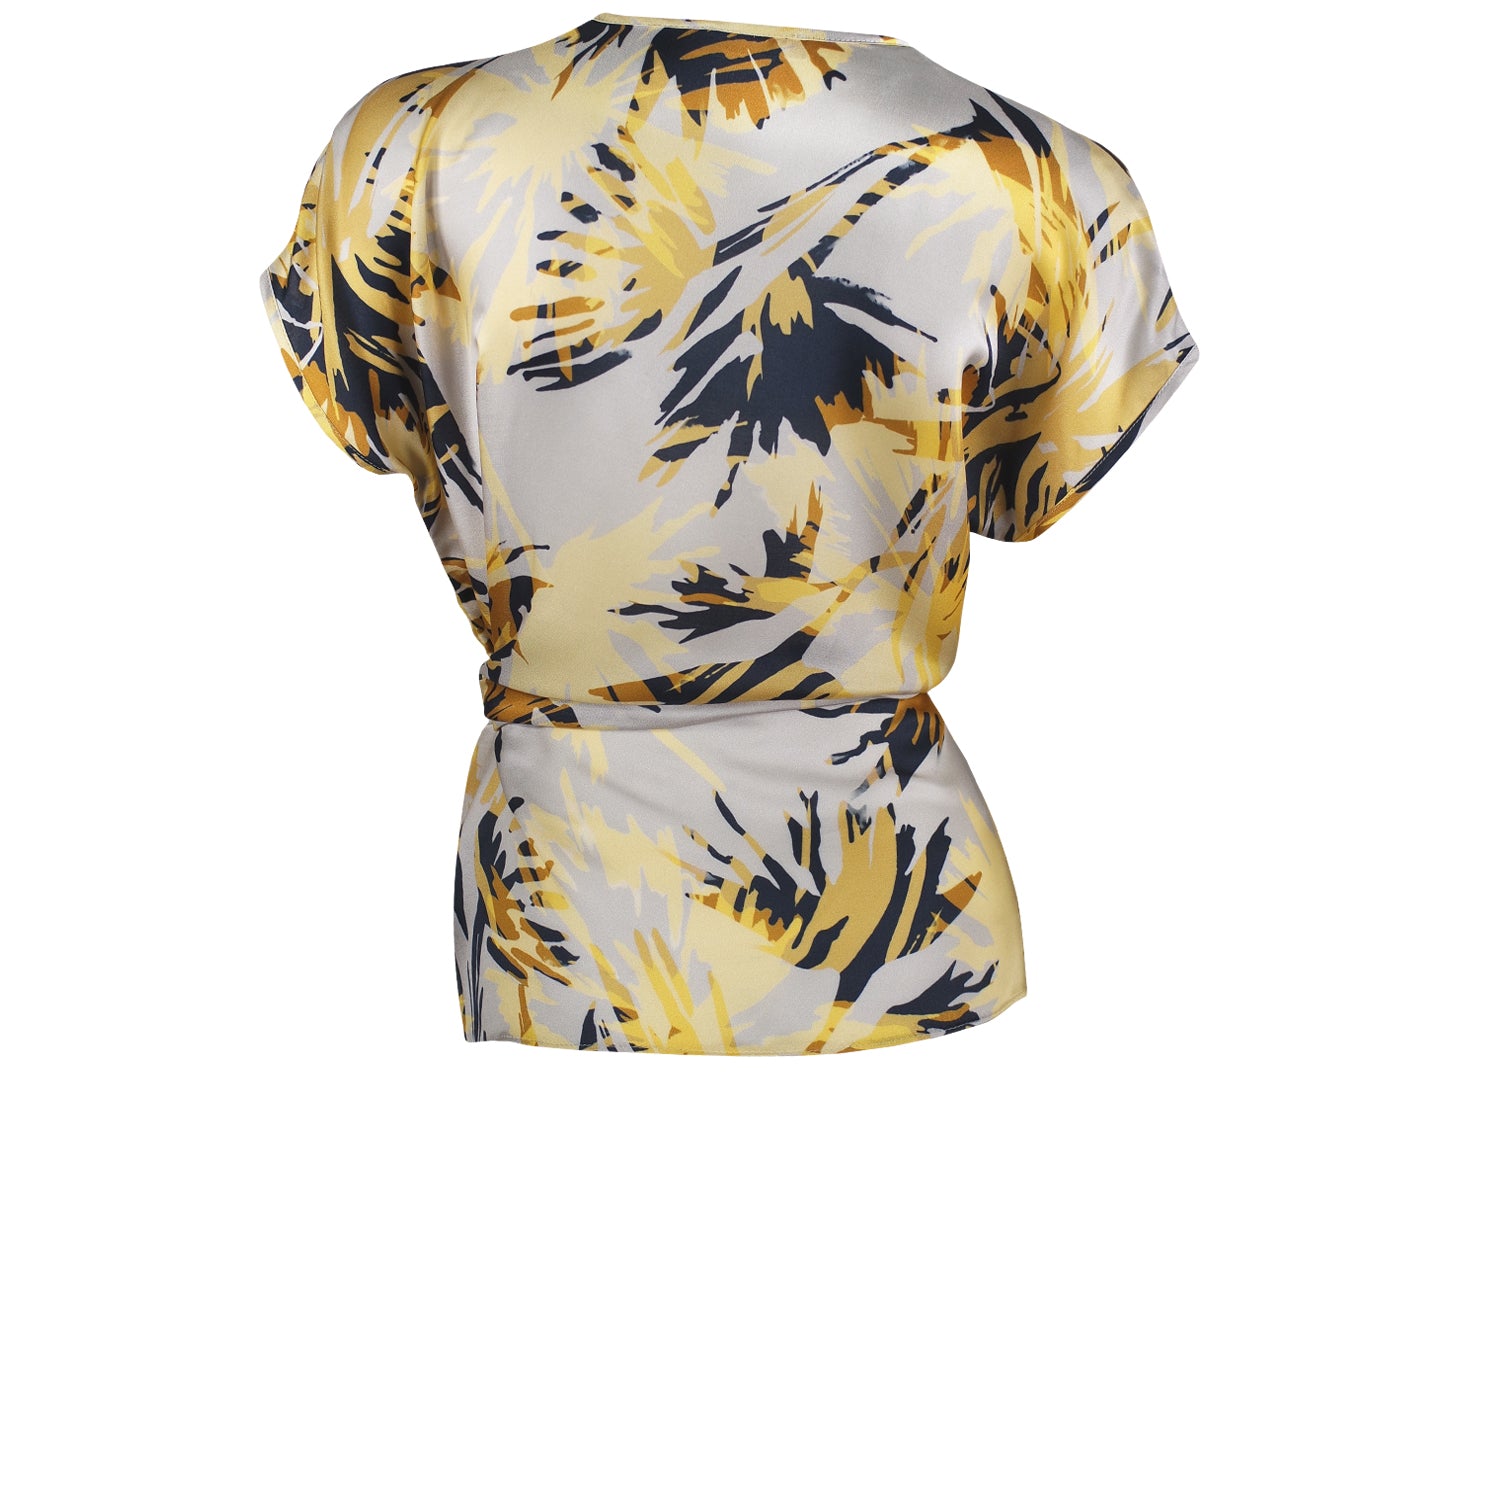 High Horse Navy, Gold and Yellow Printed Silk Viscose Tie Top by Me&Thee